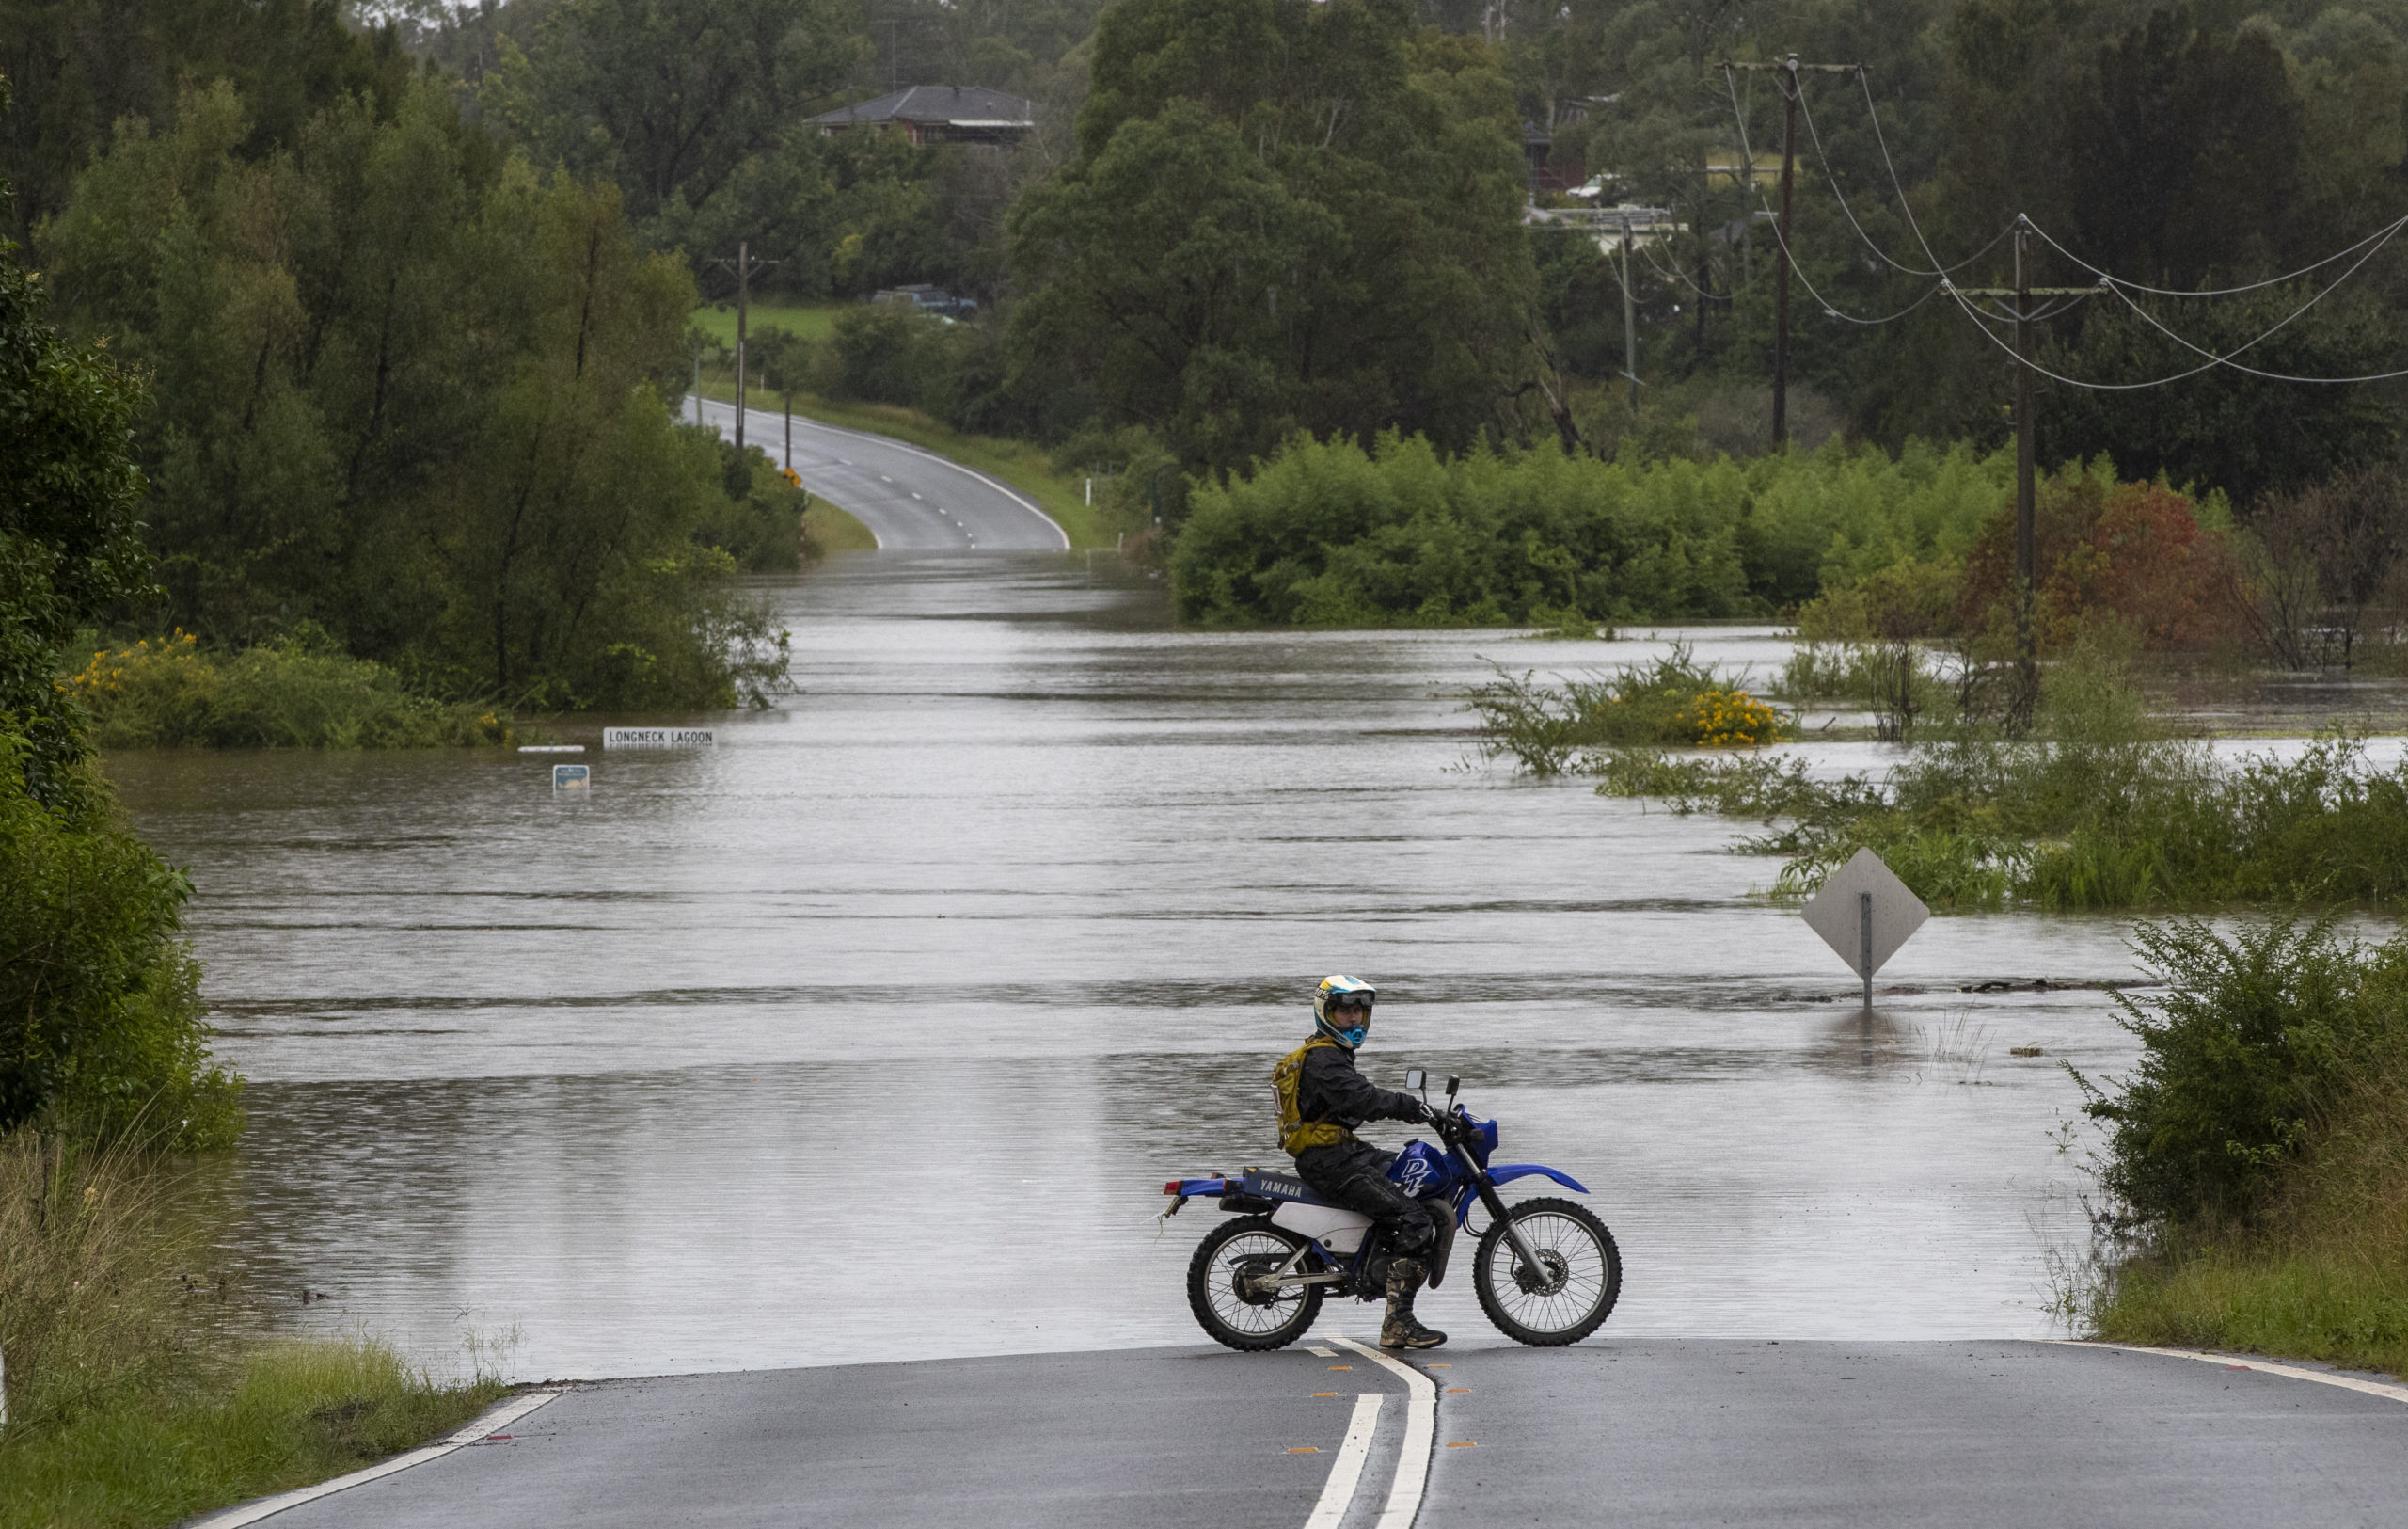 A motorcyclist's progress is blocked by a flooded road at Old Pitt Town, northwest of Sydney. (Photo: Mark Baker, AP)